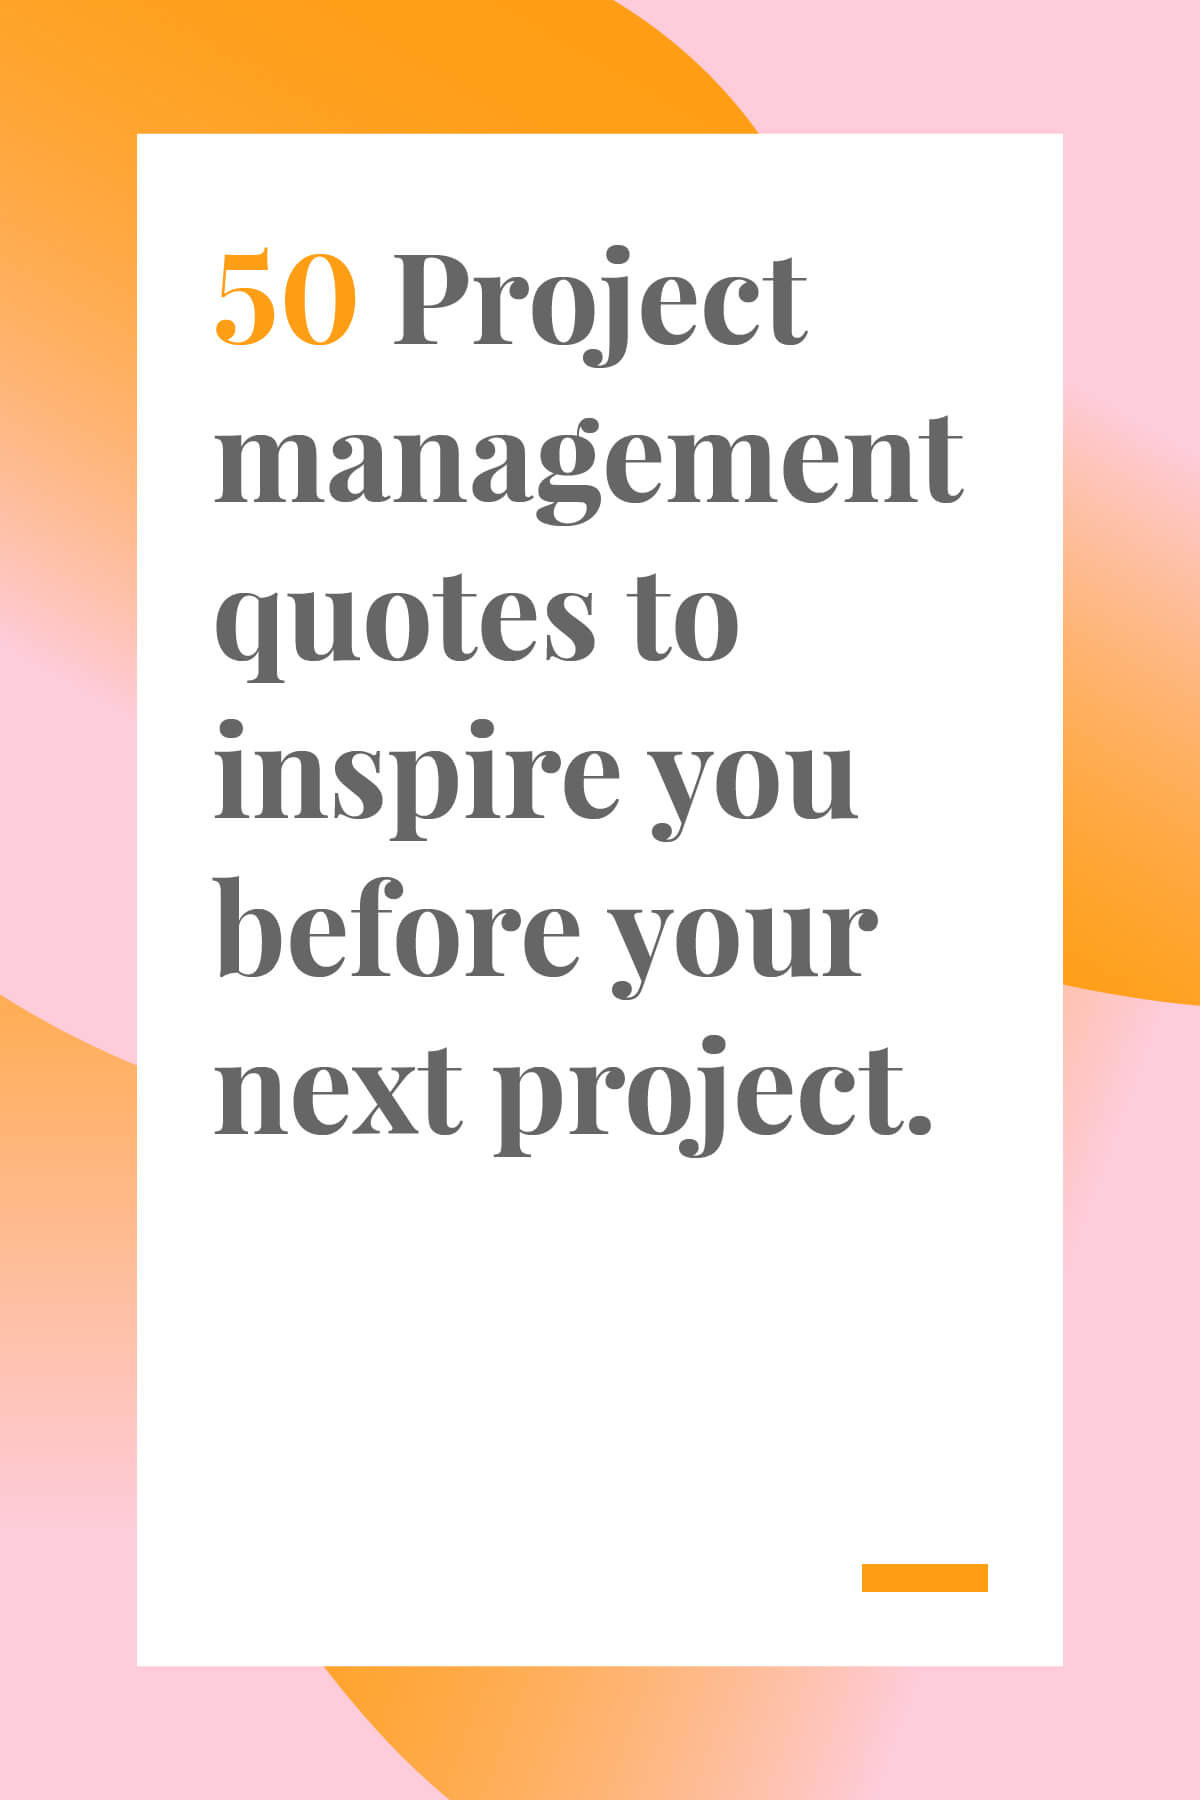 Manager Quotes Inspirational
 50 Project Management Quotes to Inspire You Before Your